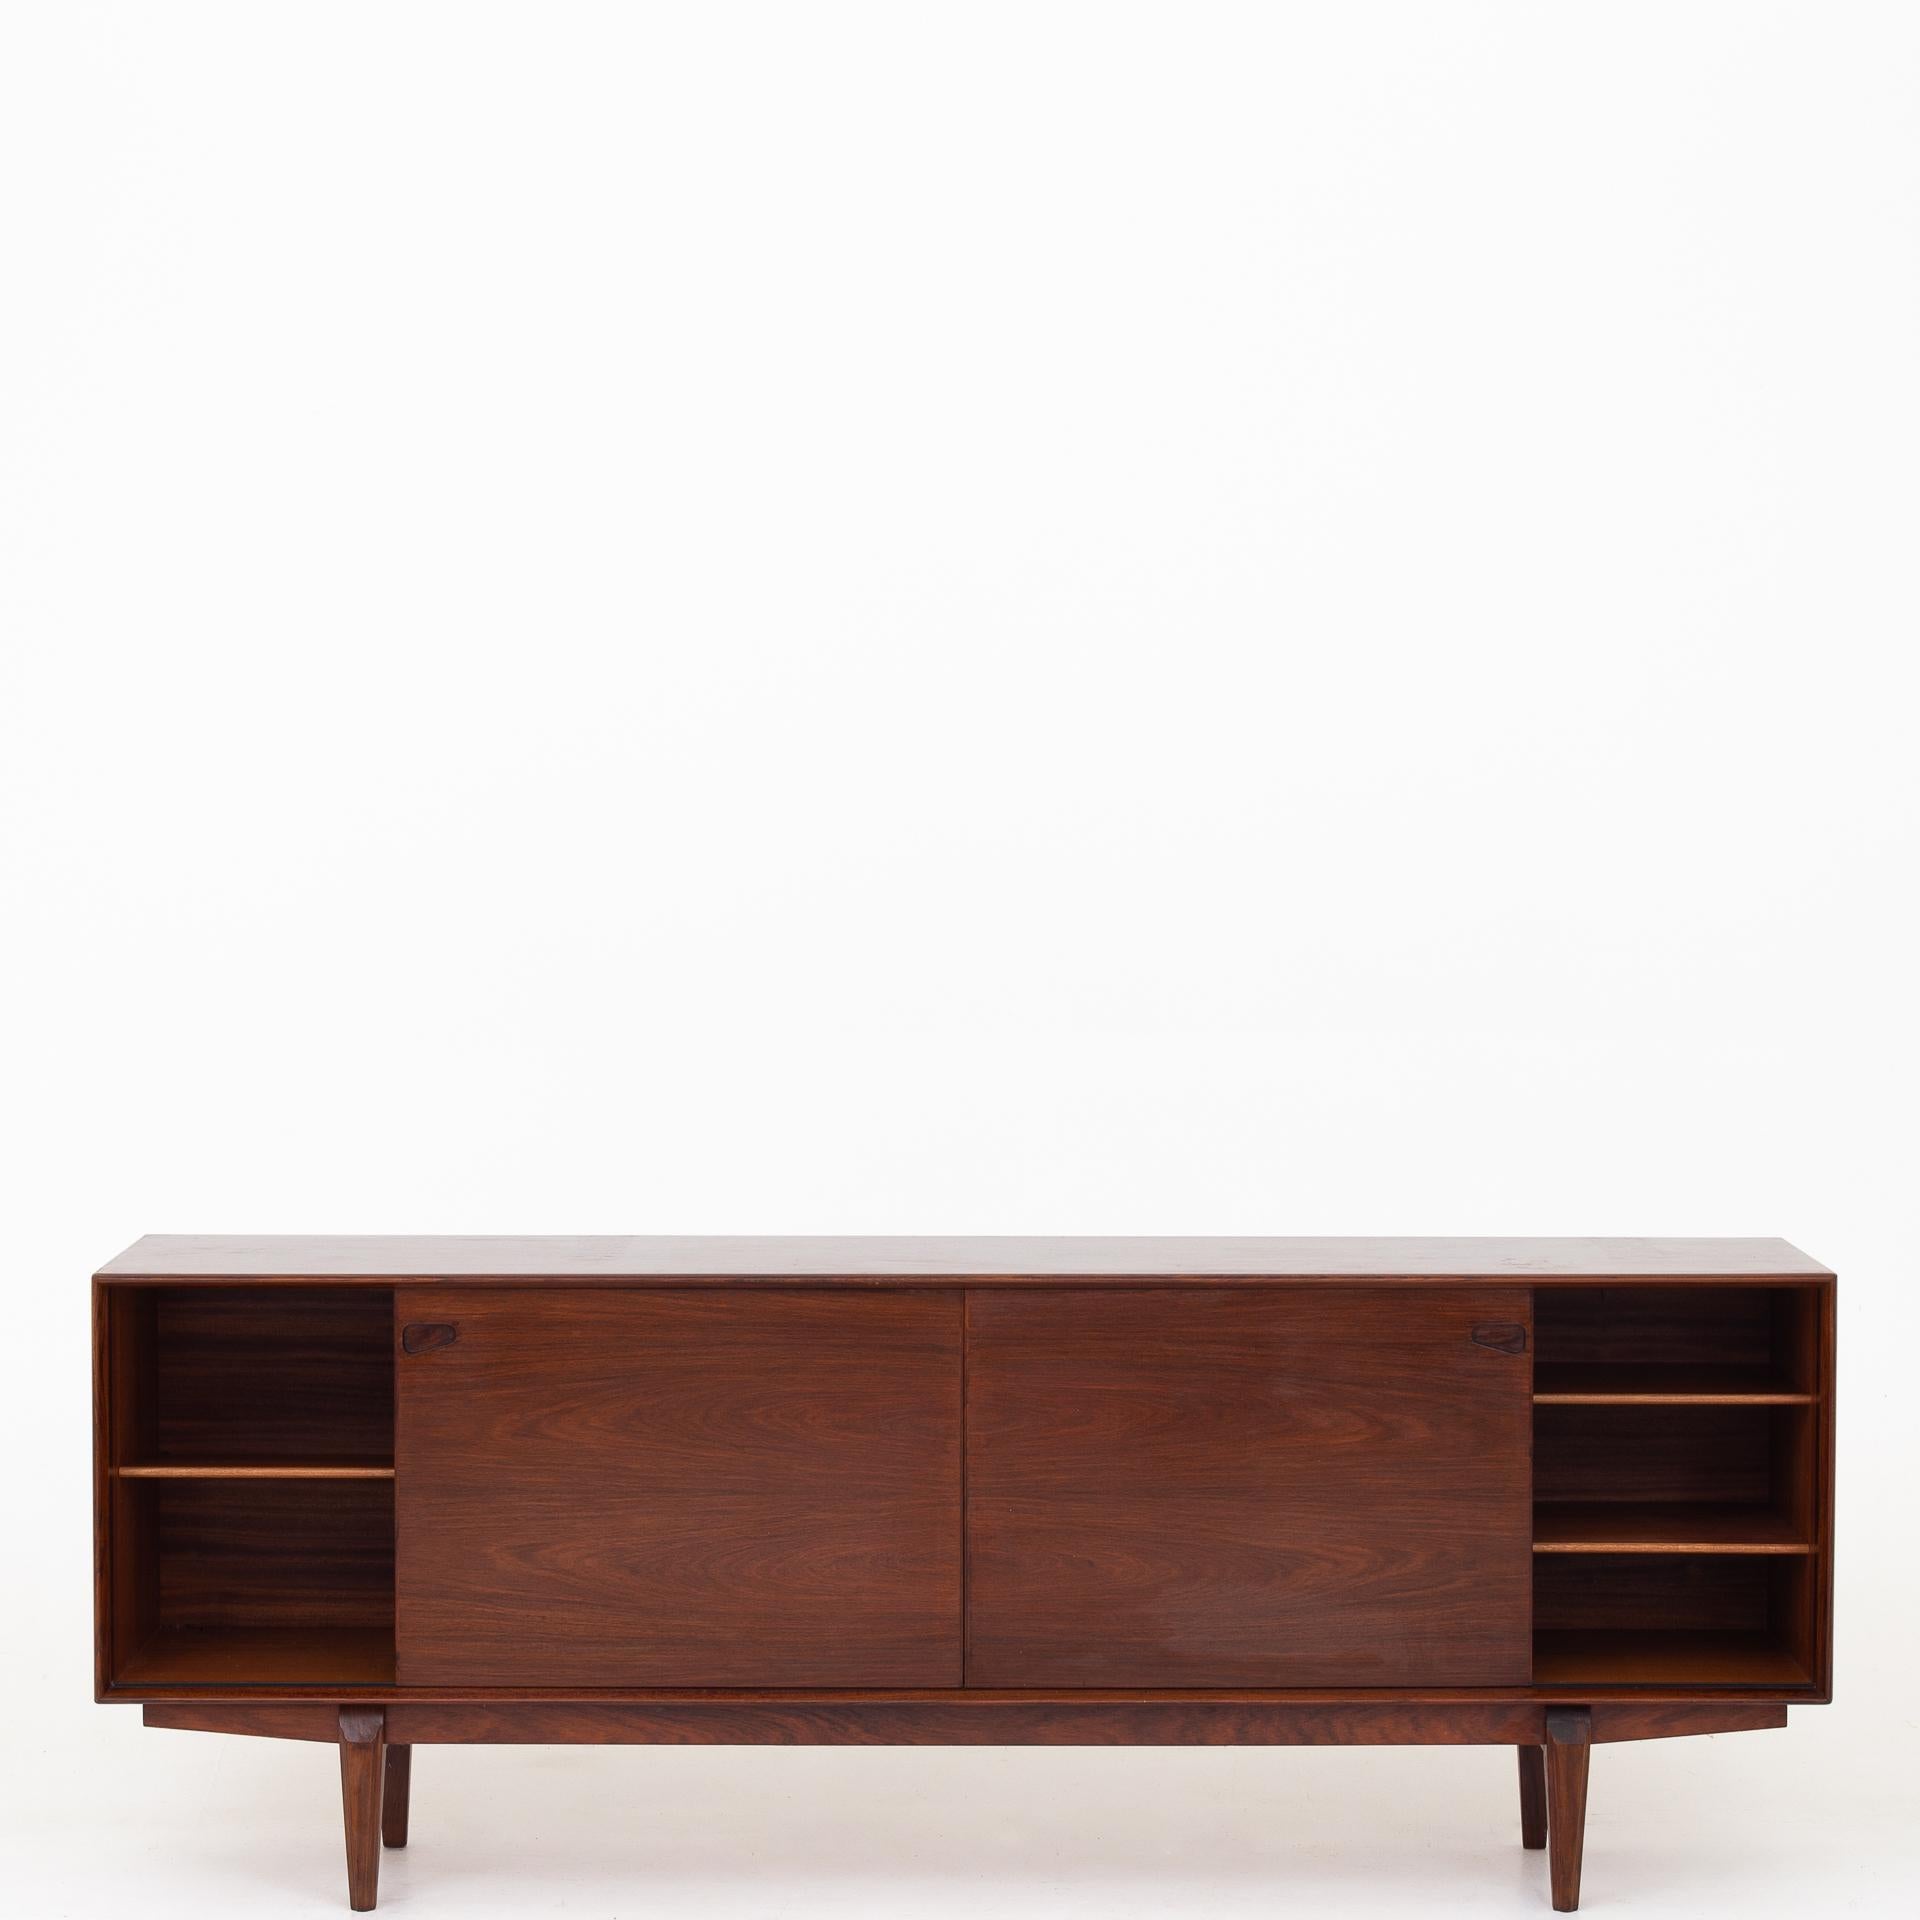 Model 65 - Sideboard in rosewood with two doors and five drawers. Maker Skovby.